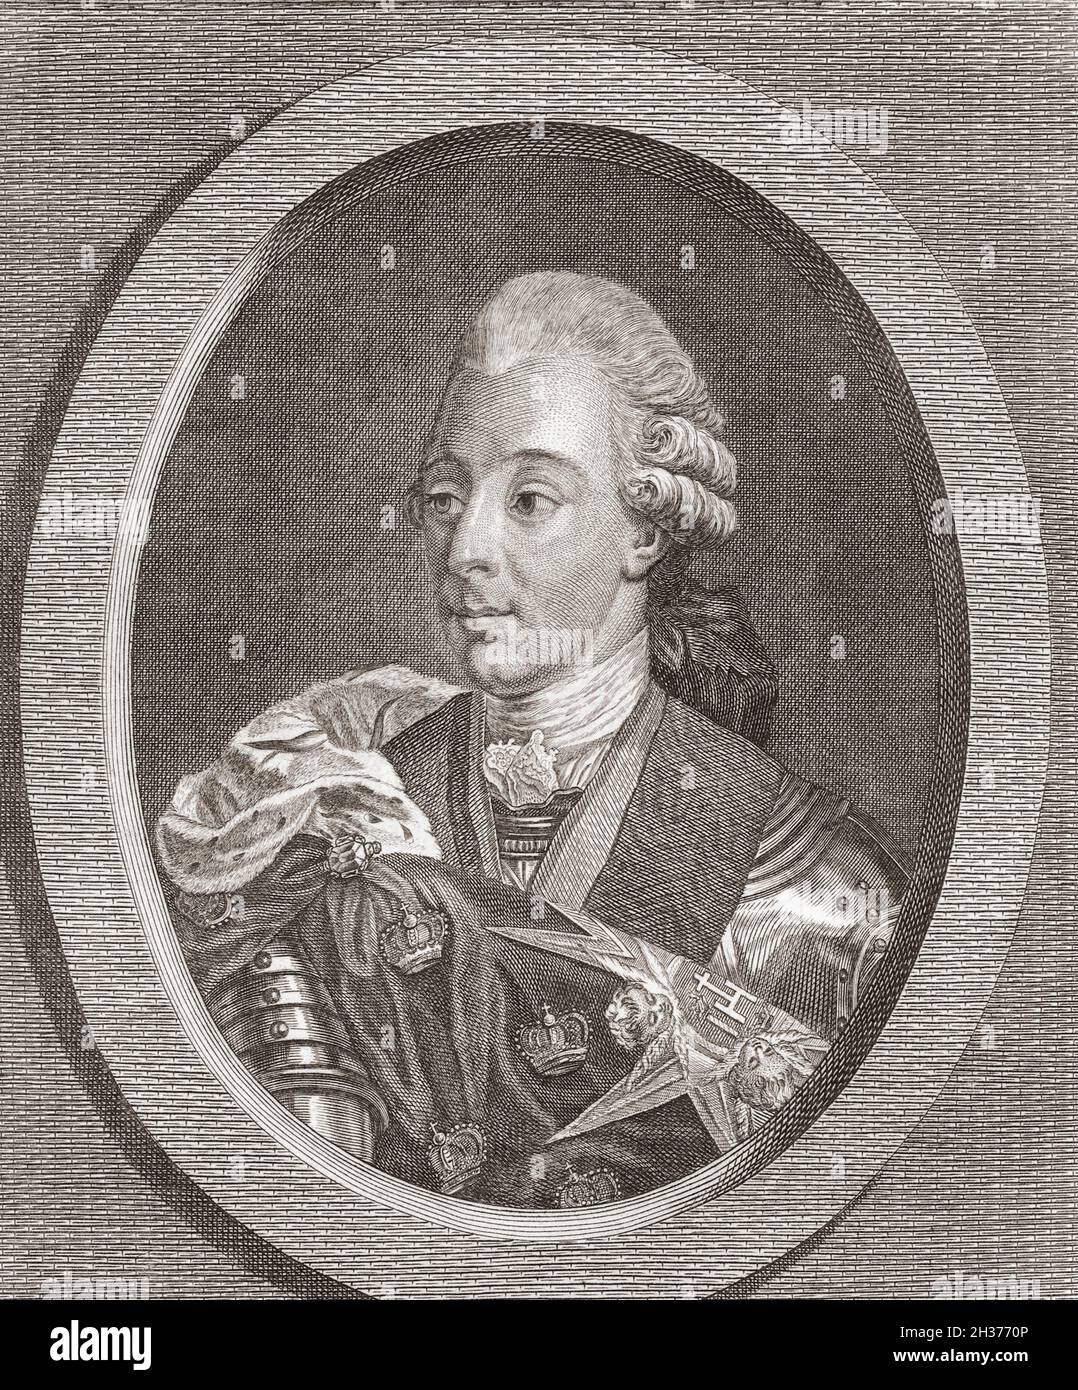 Gustav III,  1746 - 1792, King of Sweden.  Also called Gustavus III.  He was assassinated.  After an engraving by Duchenne from a work by Rathlin. Stock Photo